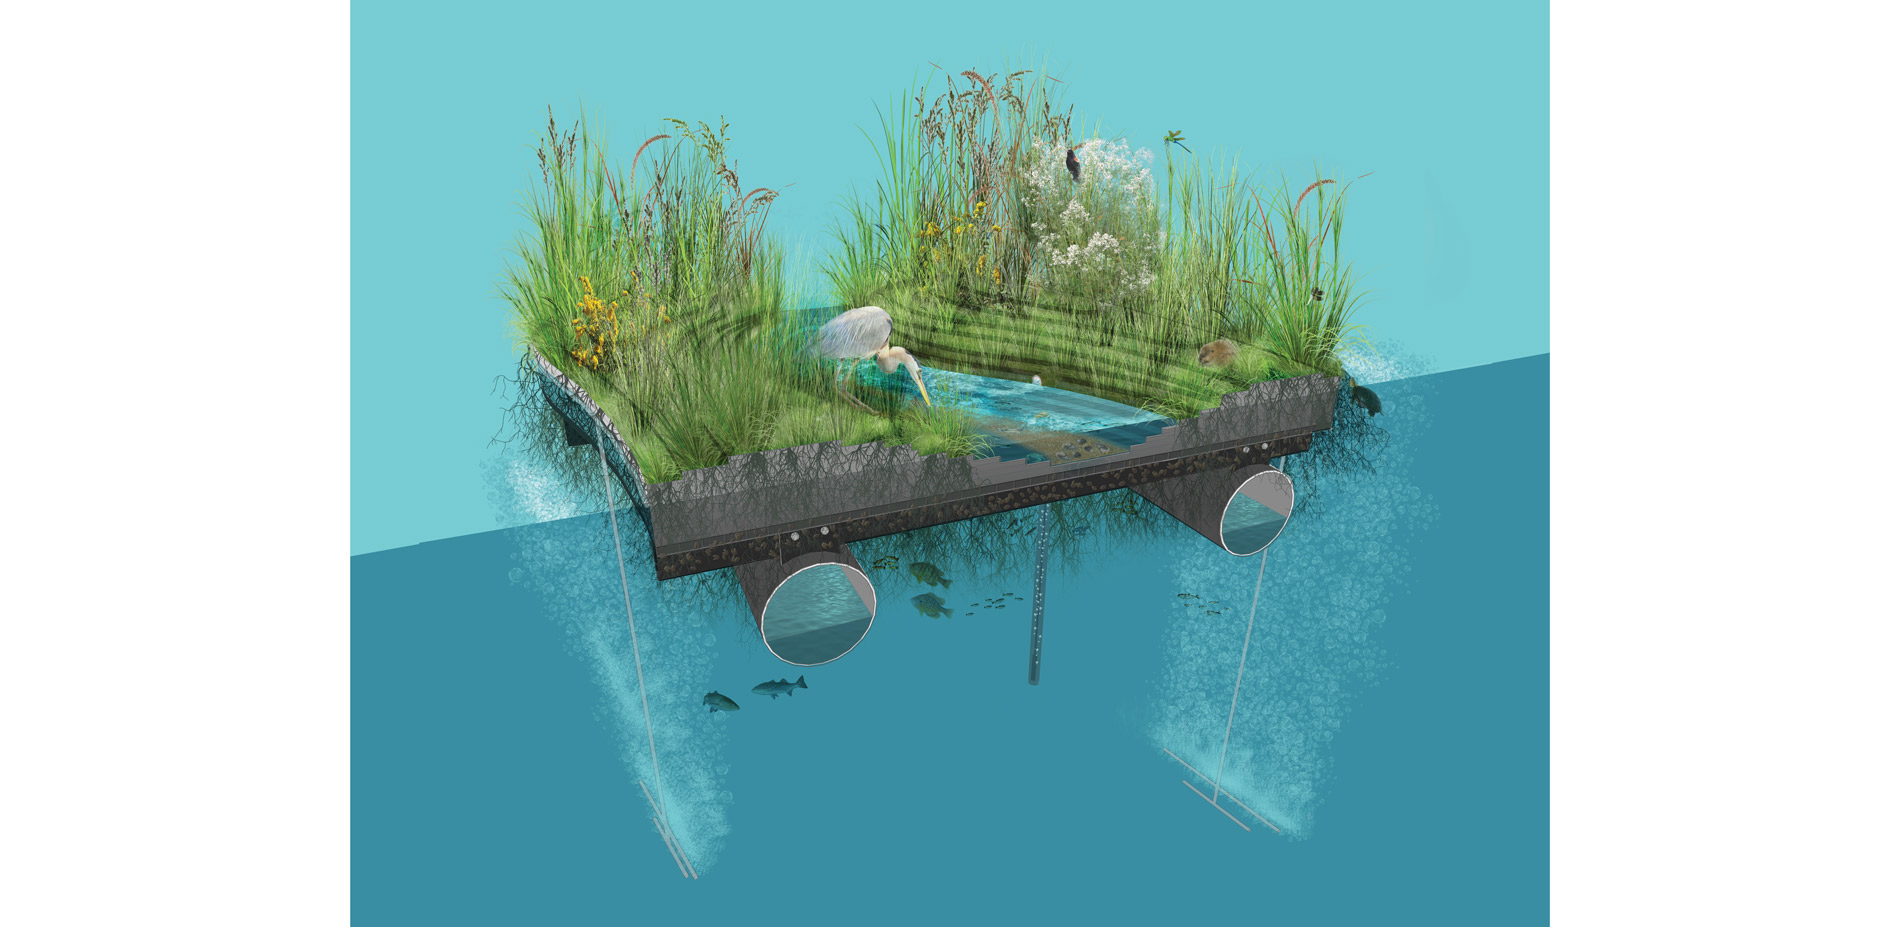 The floating wetland prototype combines the research of new technologies to test its sustainability, performance, and resiliency. Every square inch of…